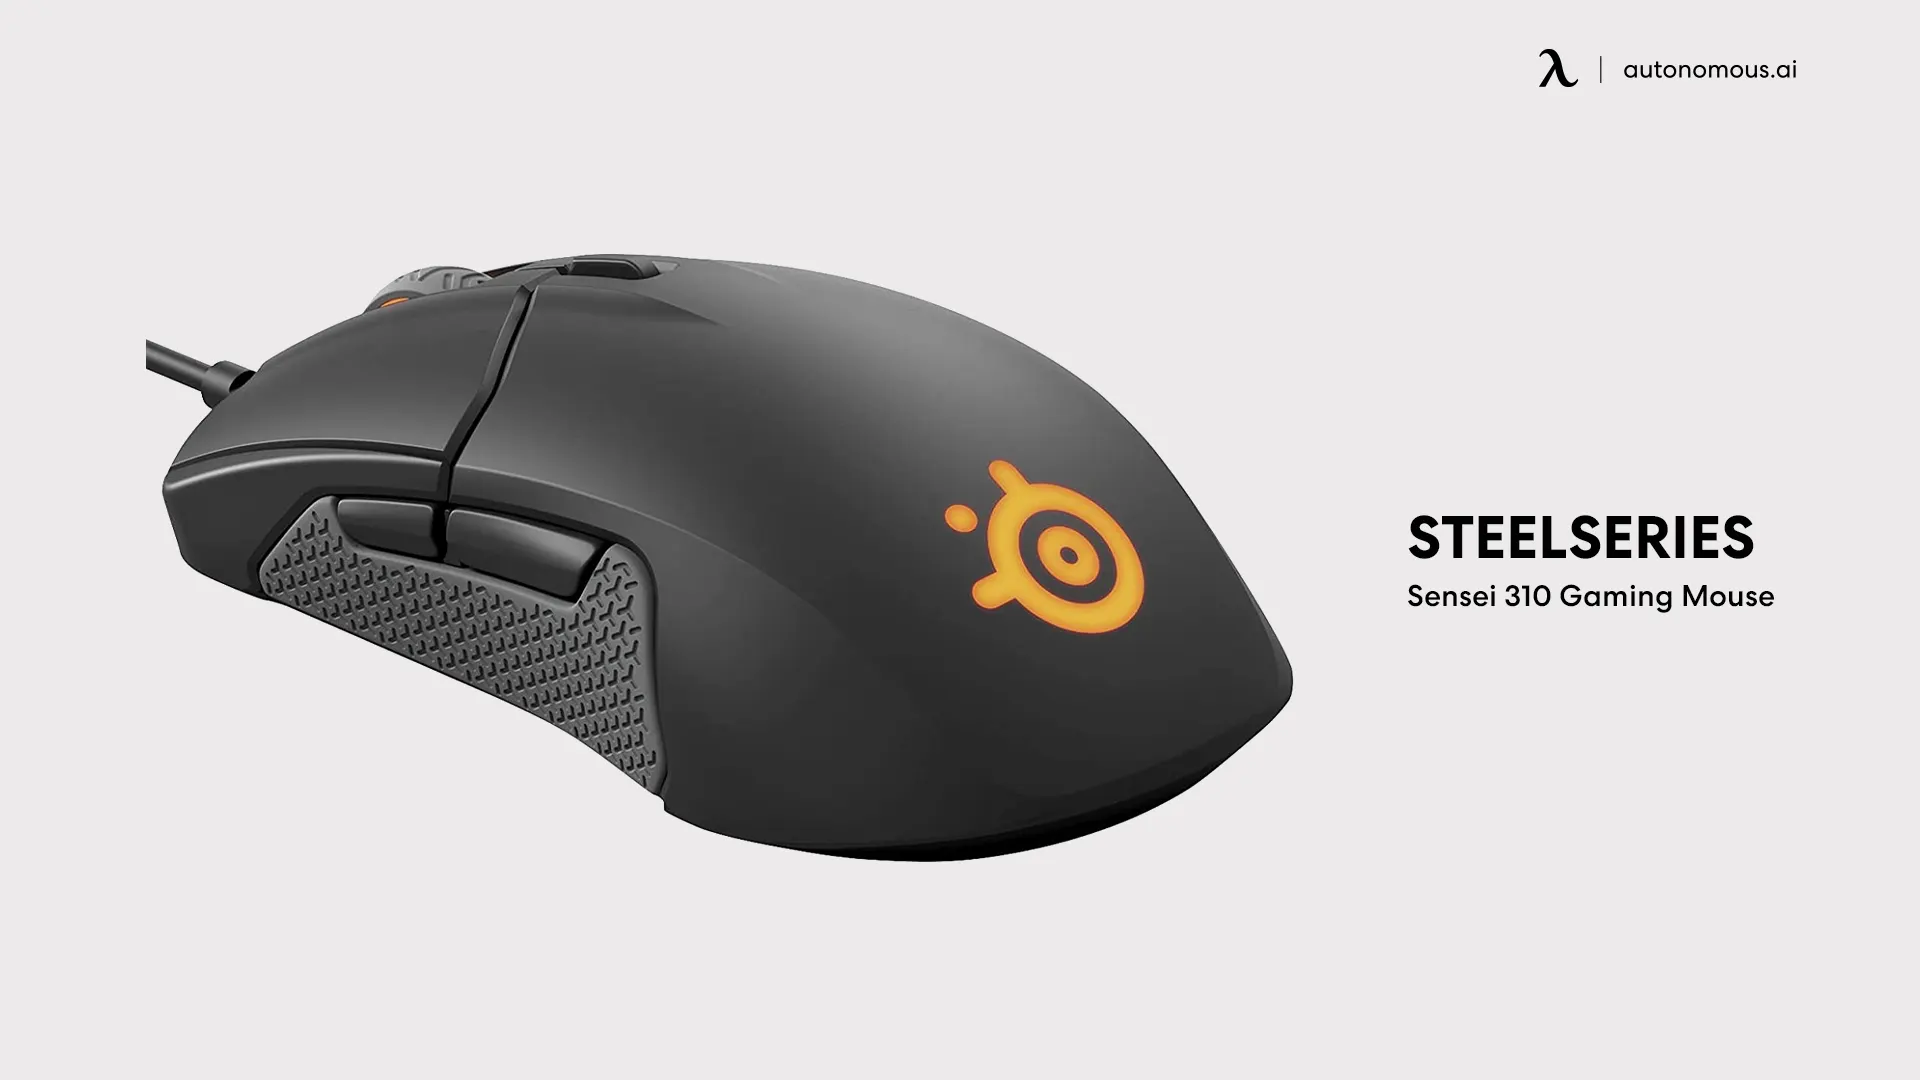 The Sensei 310 from SteelSeries